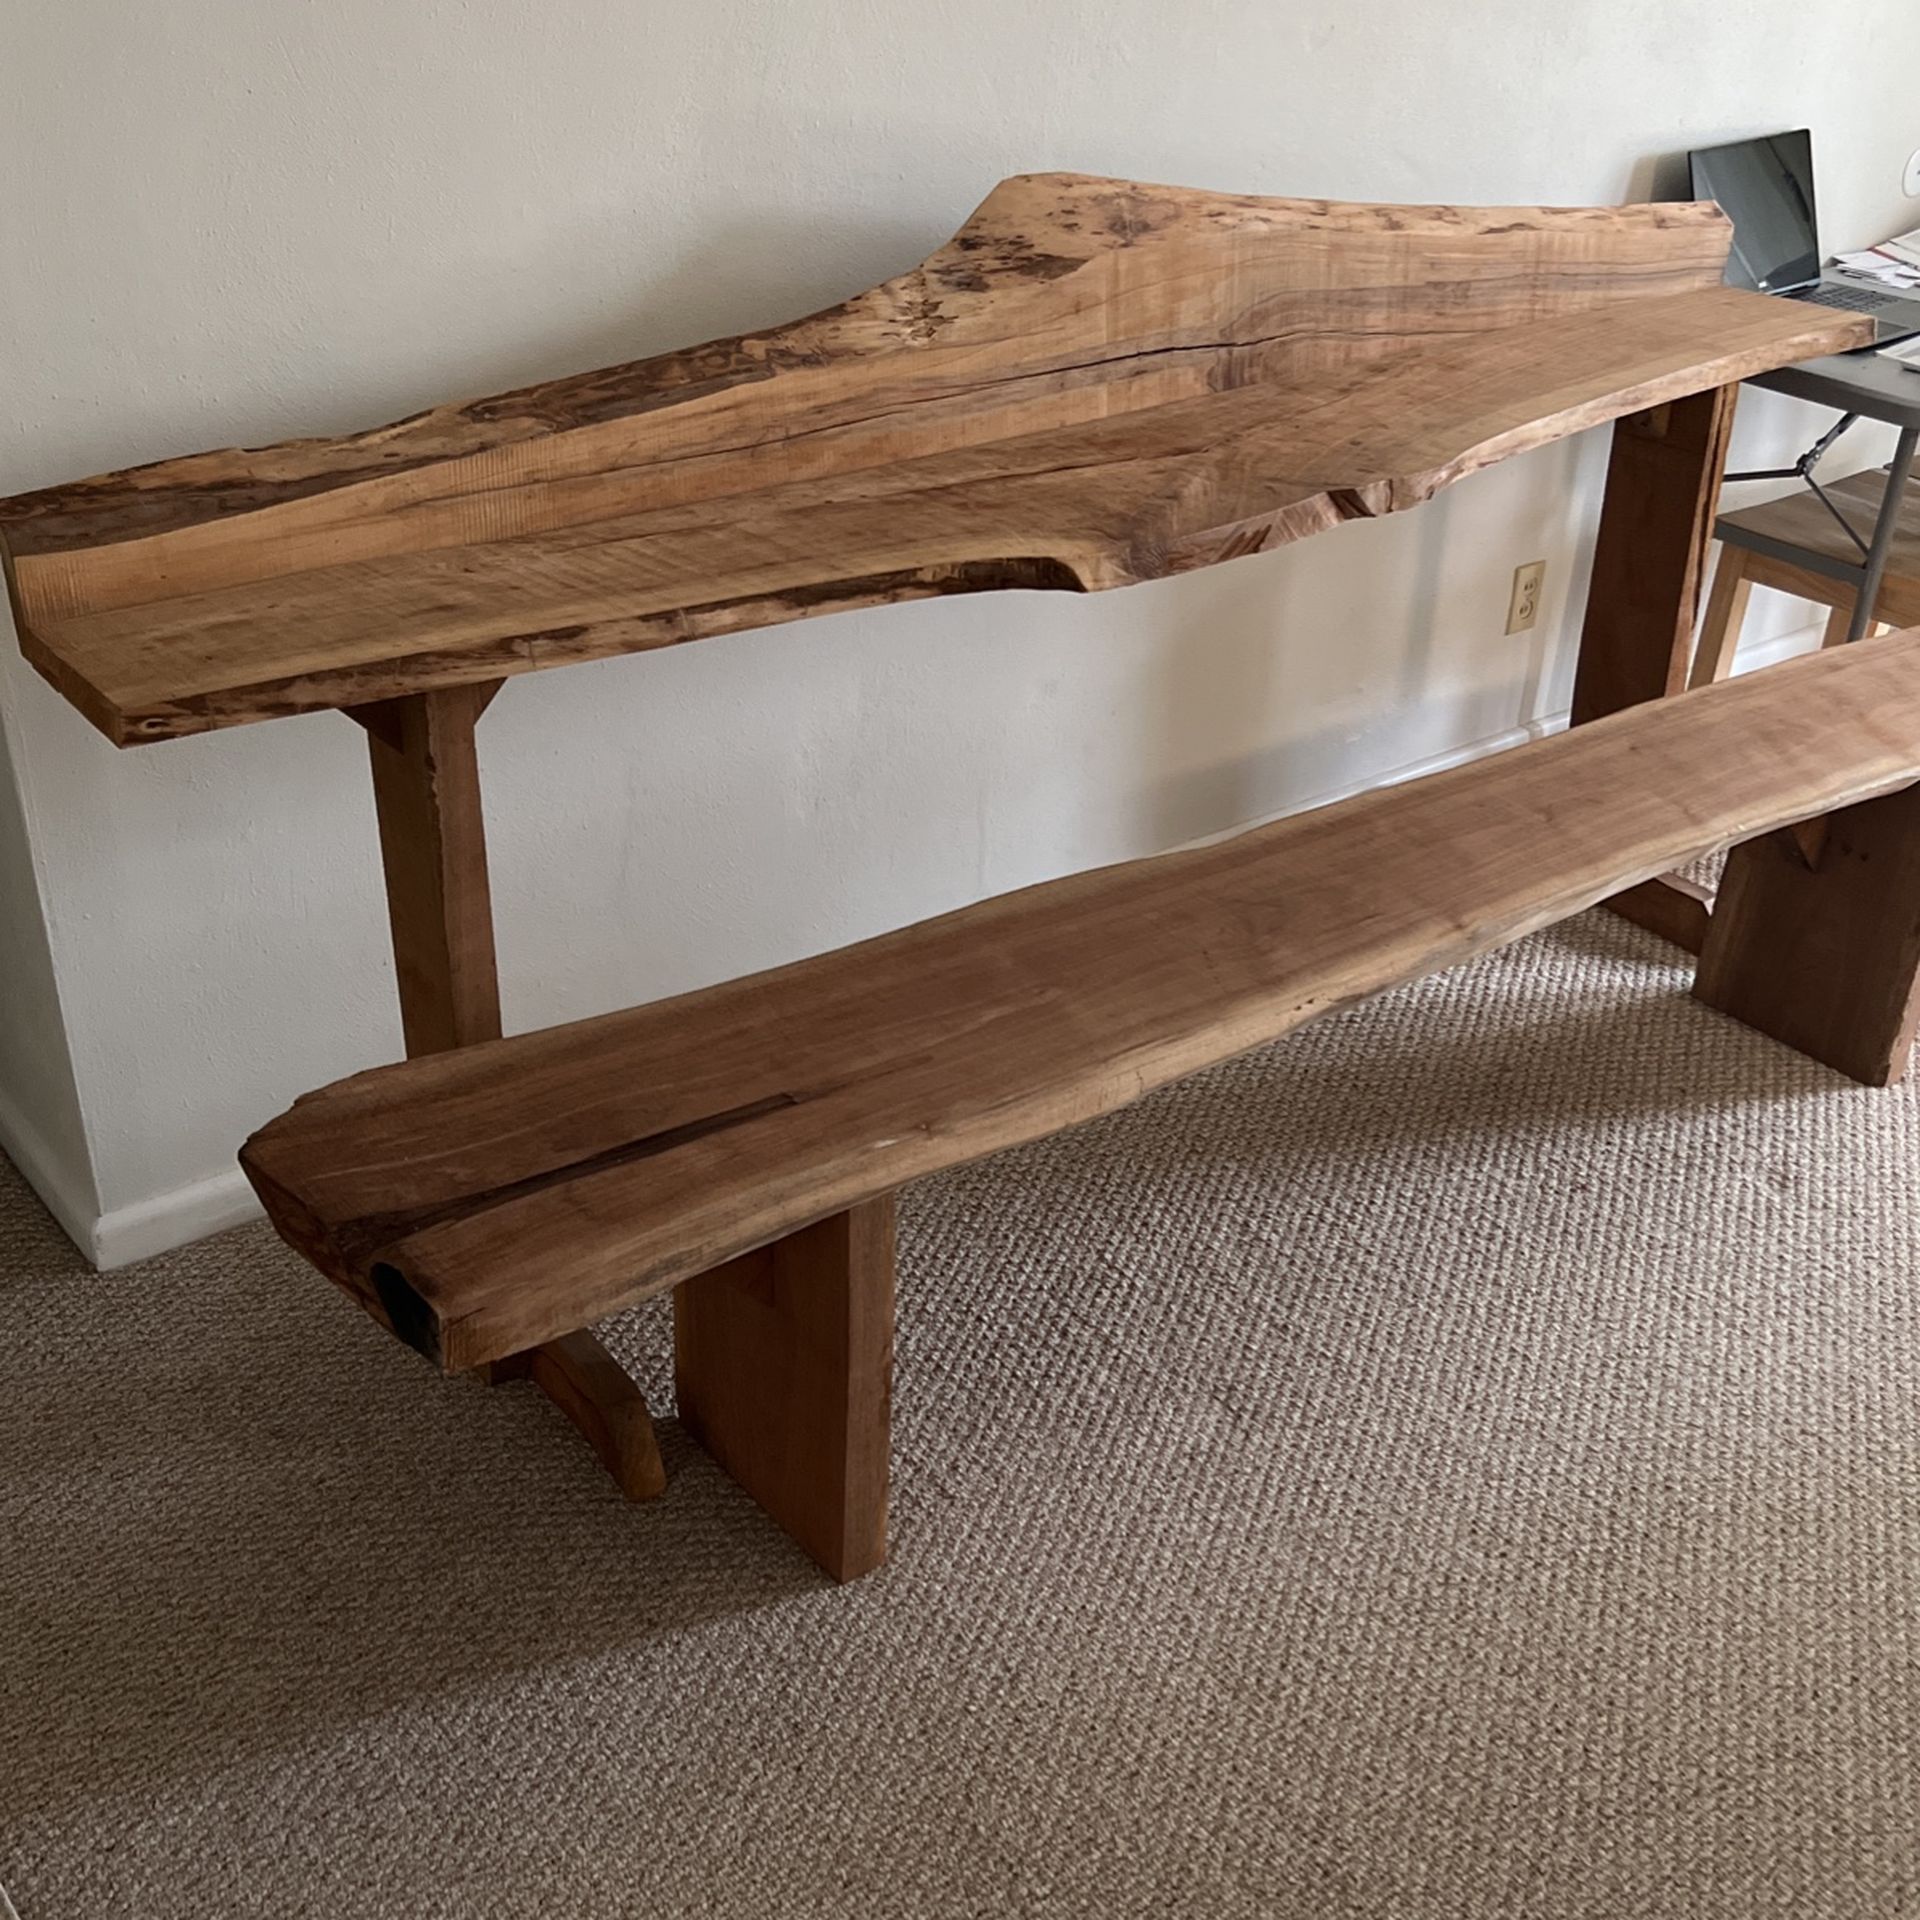 Handmade Natural Wood Plank Table And Bench